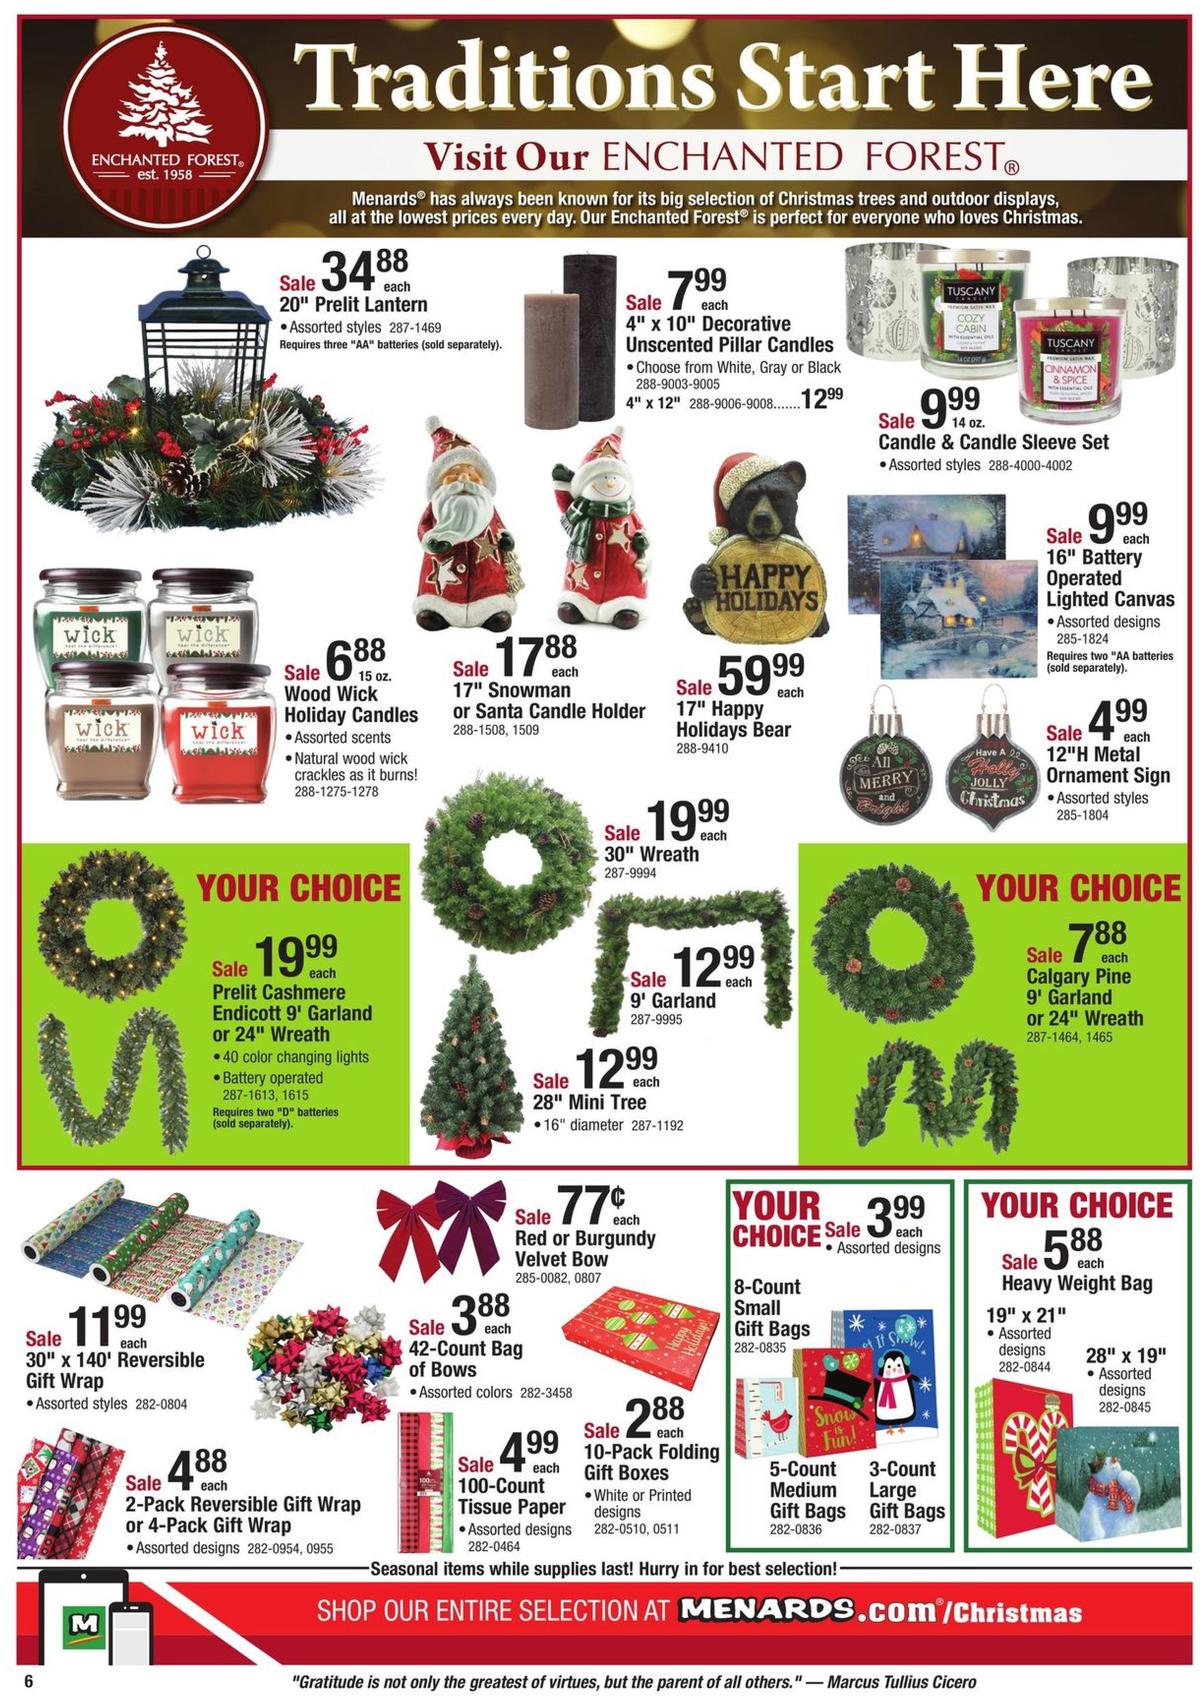 Menards Christmas Catalog Weekly Ads & Special Buys from November 24